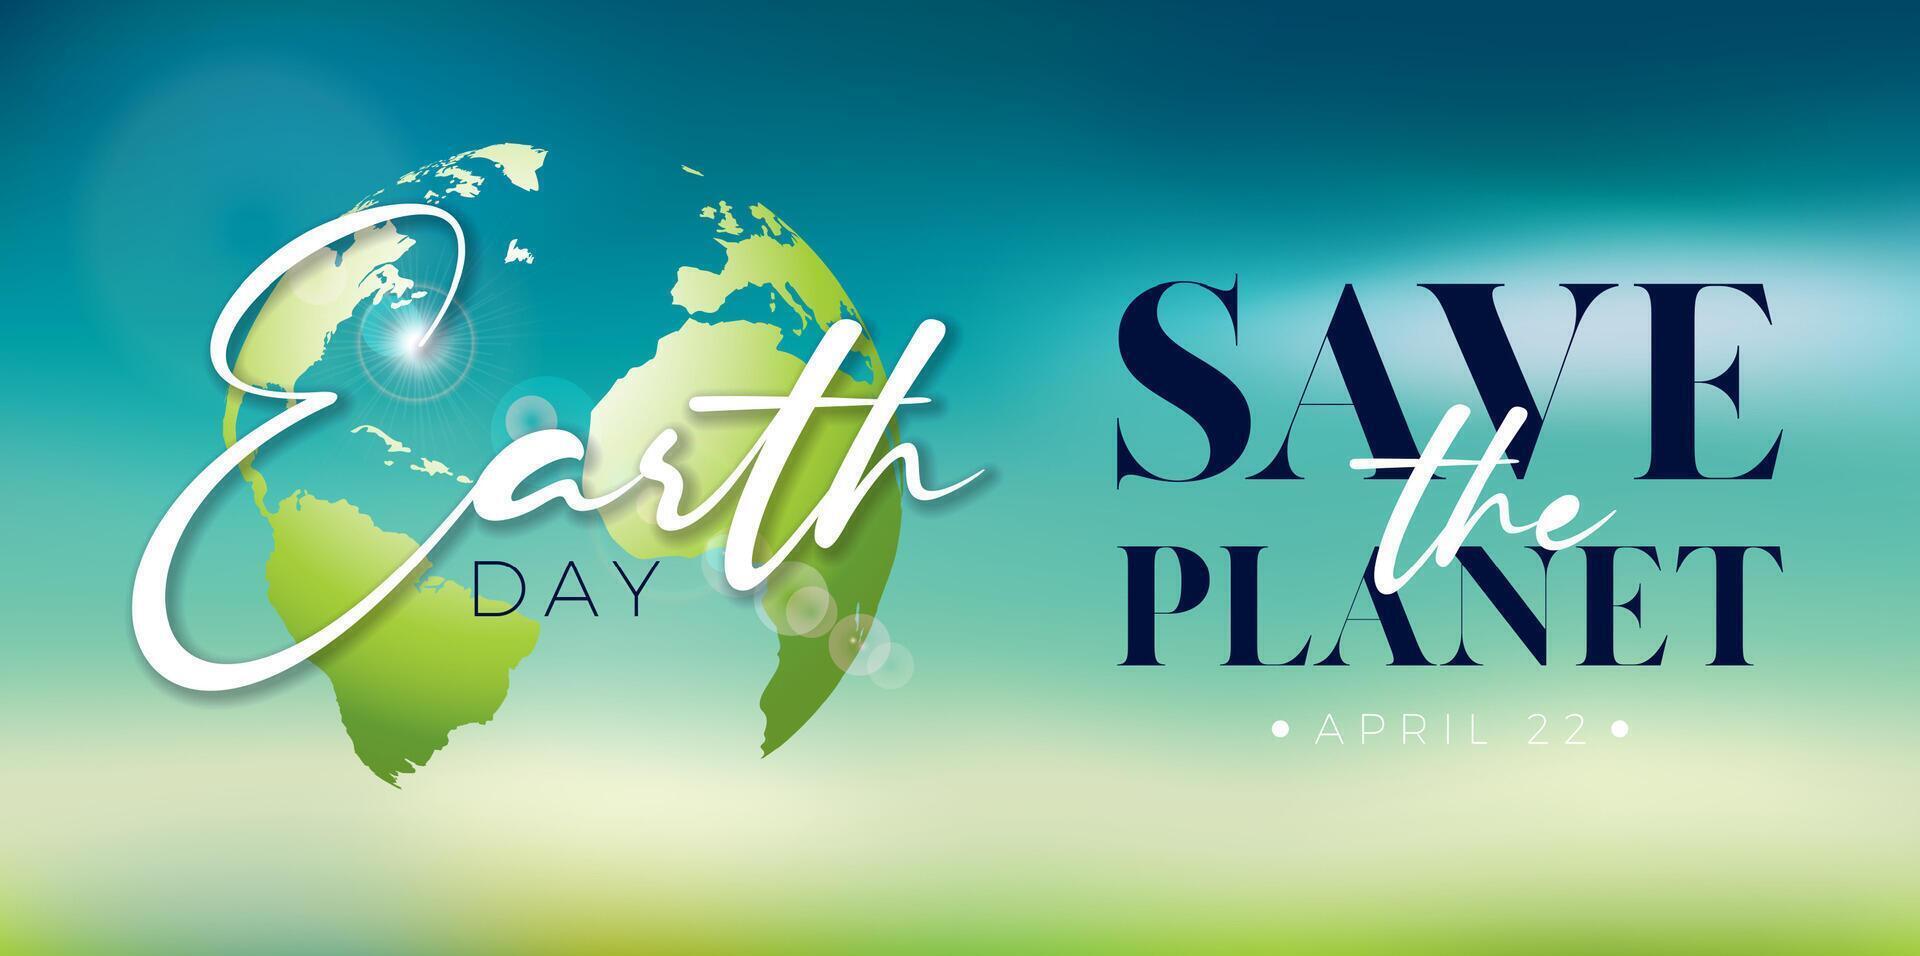 Happy Earth Day Illustration with World Map and Typography Lettering on Blurred Background. April 22 Environmental and Eco Concept with Typography Lettering. Design for Banner vector